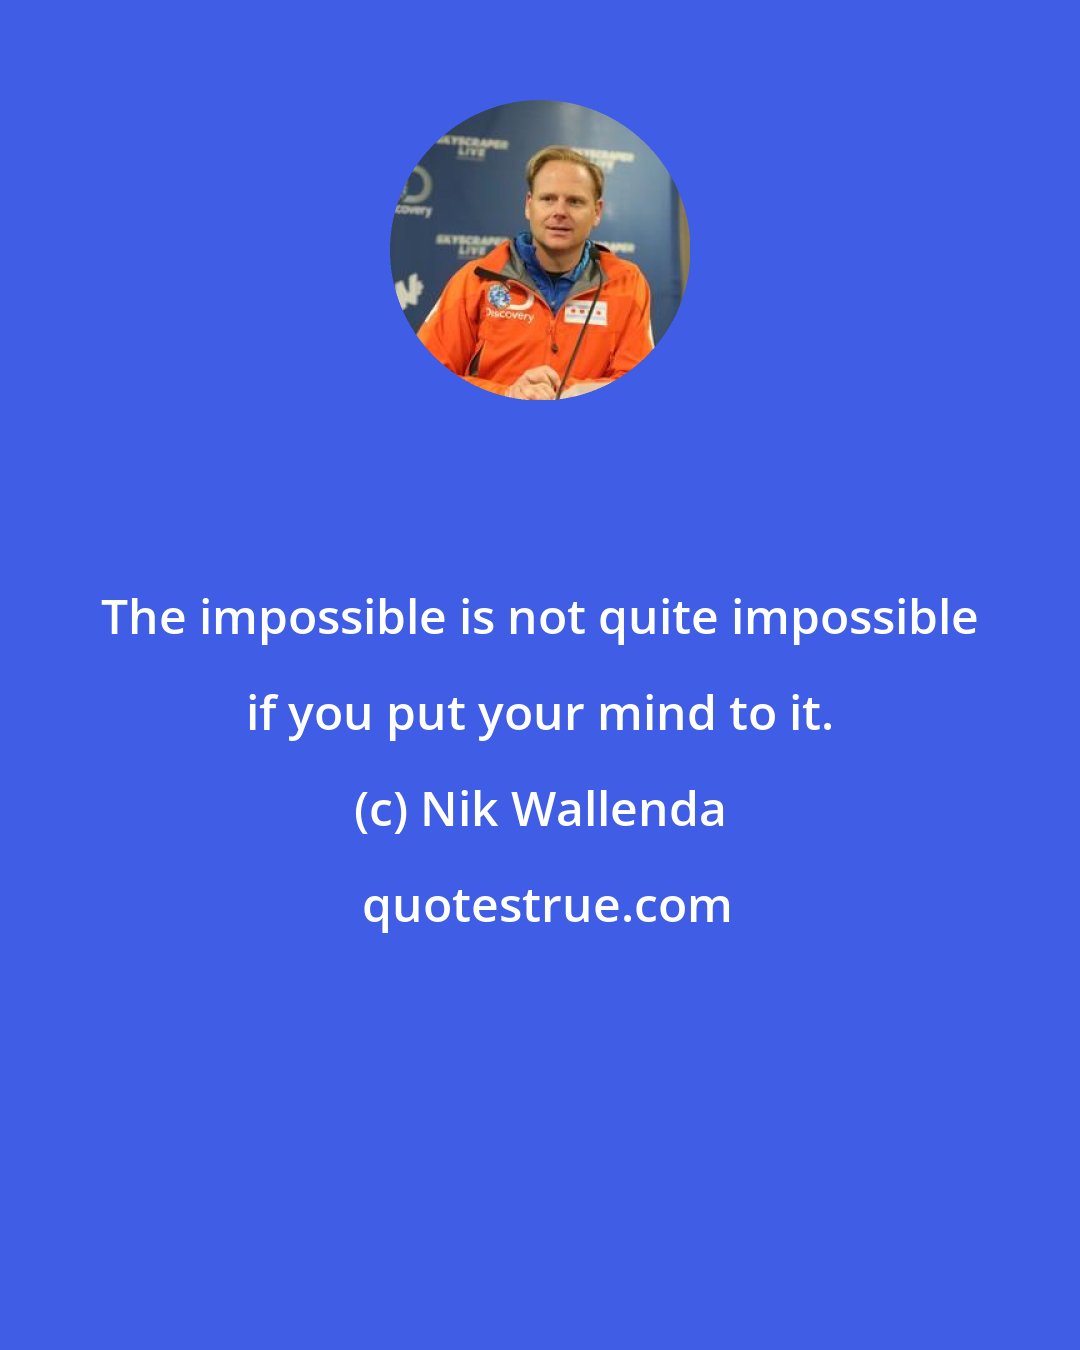 Nik Wallenda: The impossible is not quite impossible if you put your mind to it.